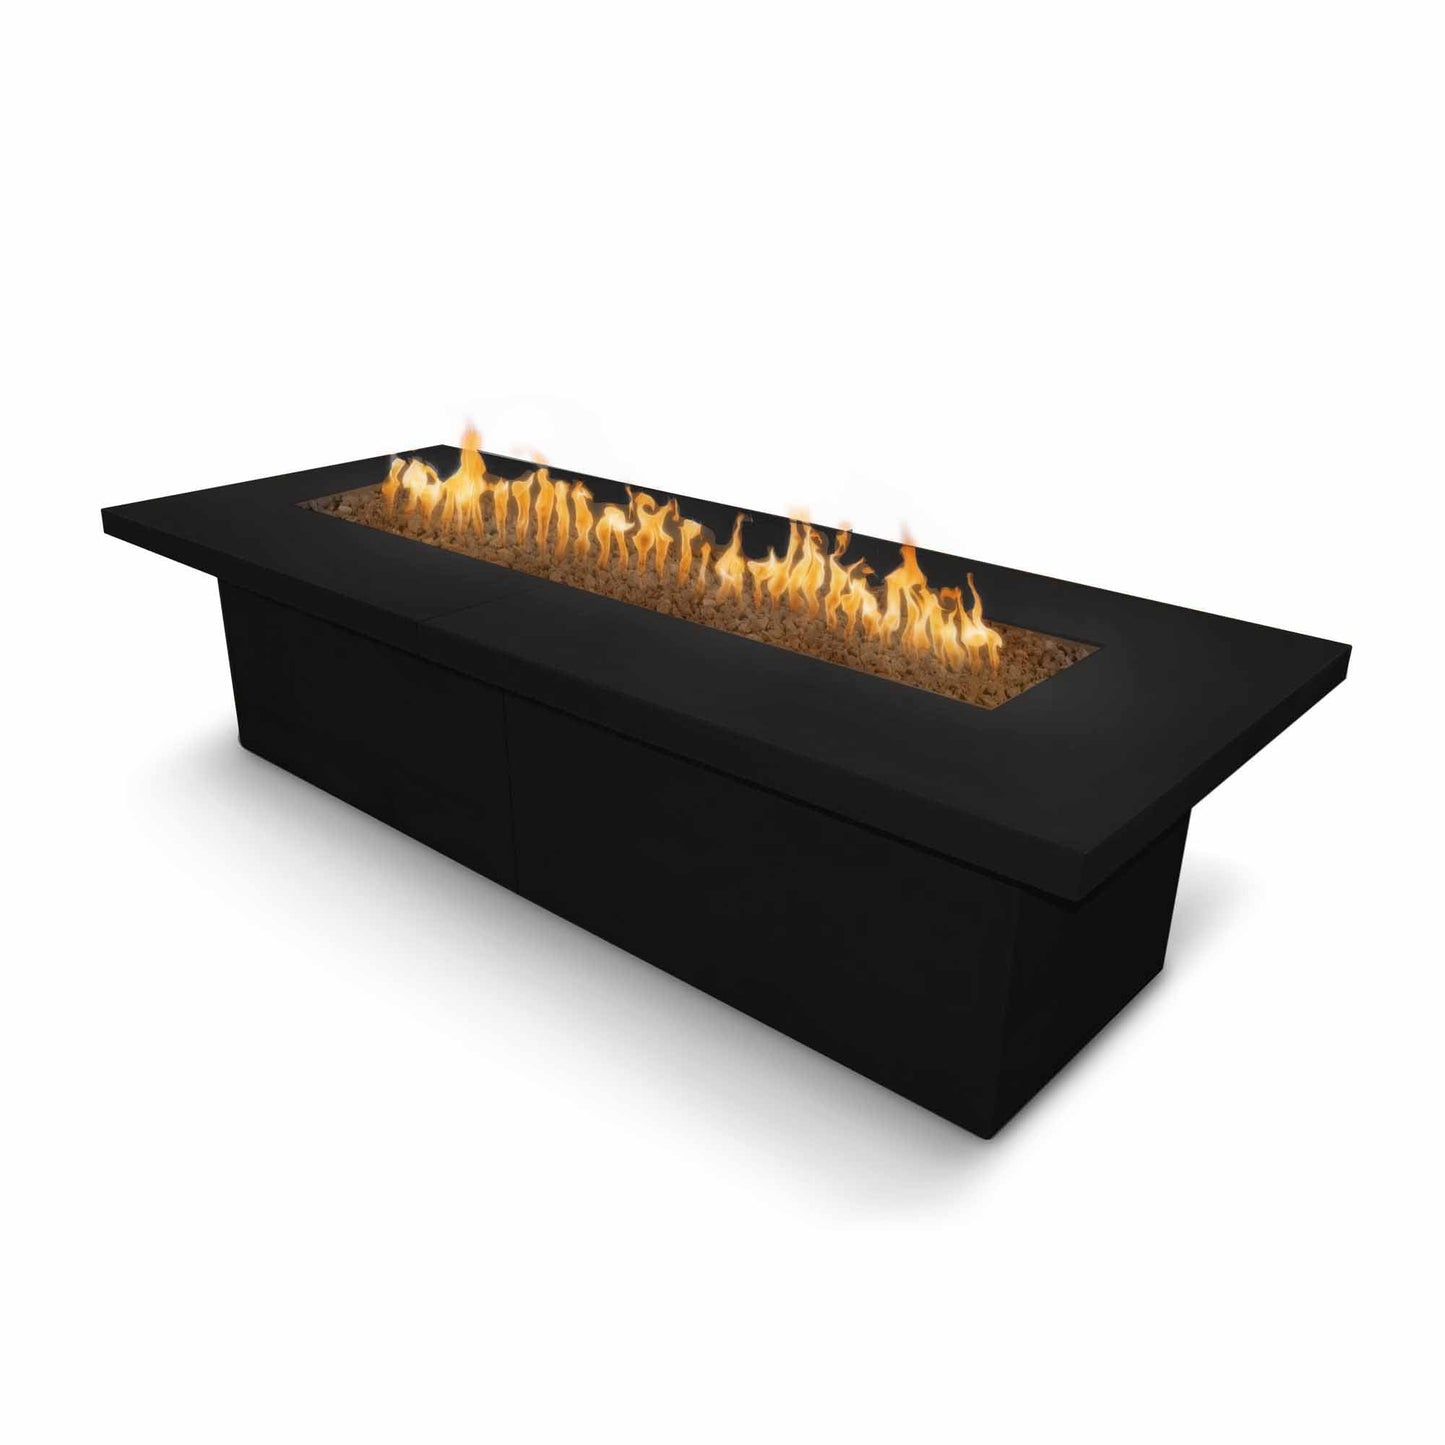 The Outdoor Plus Rectangular Newport 72" Hammered Copper Liquid Propane Fire Pit with 12V Electronic Ignition